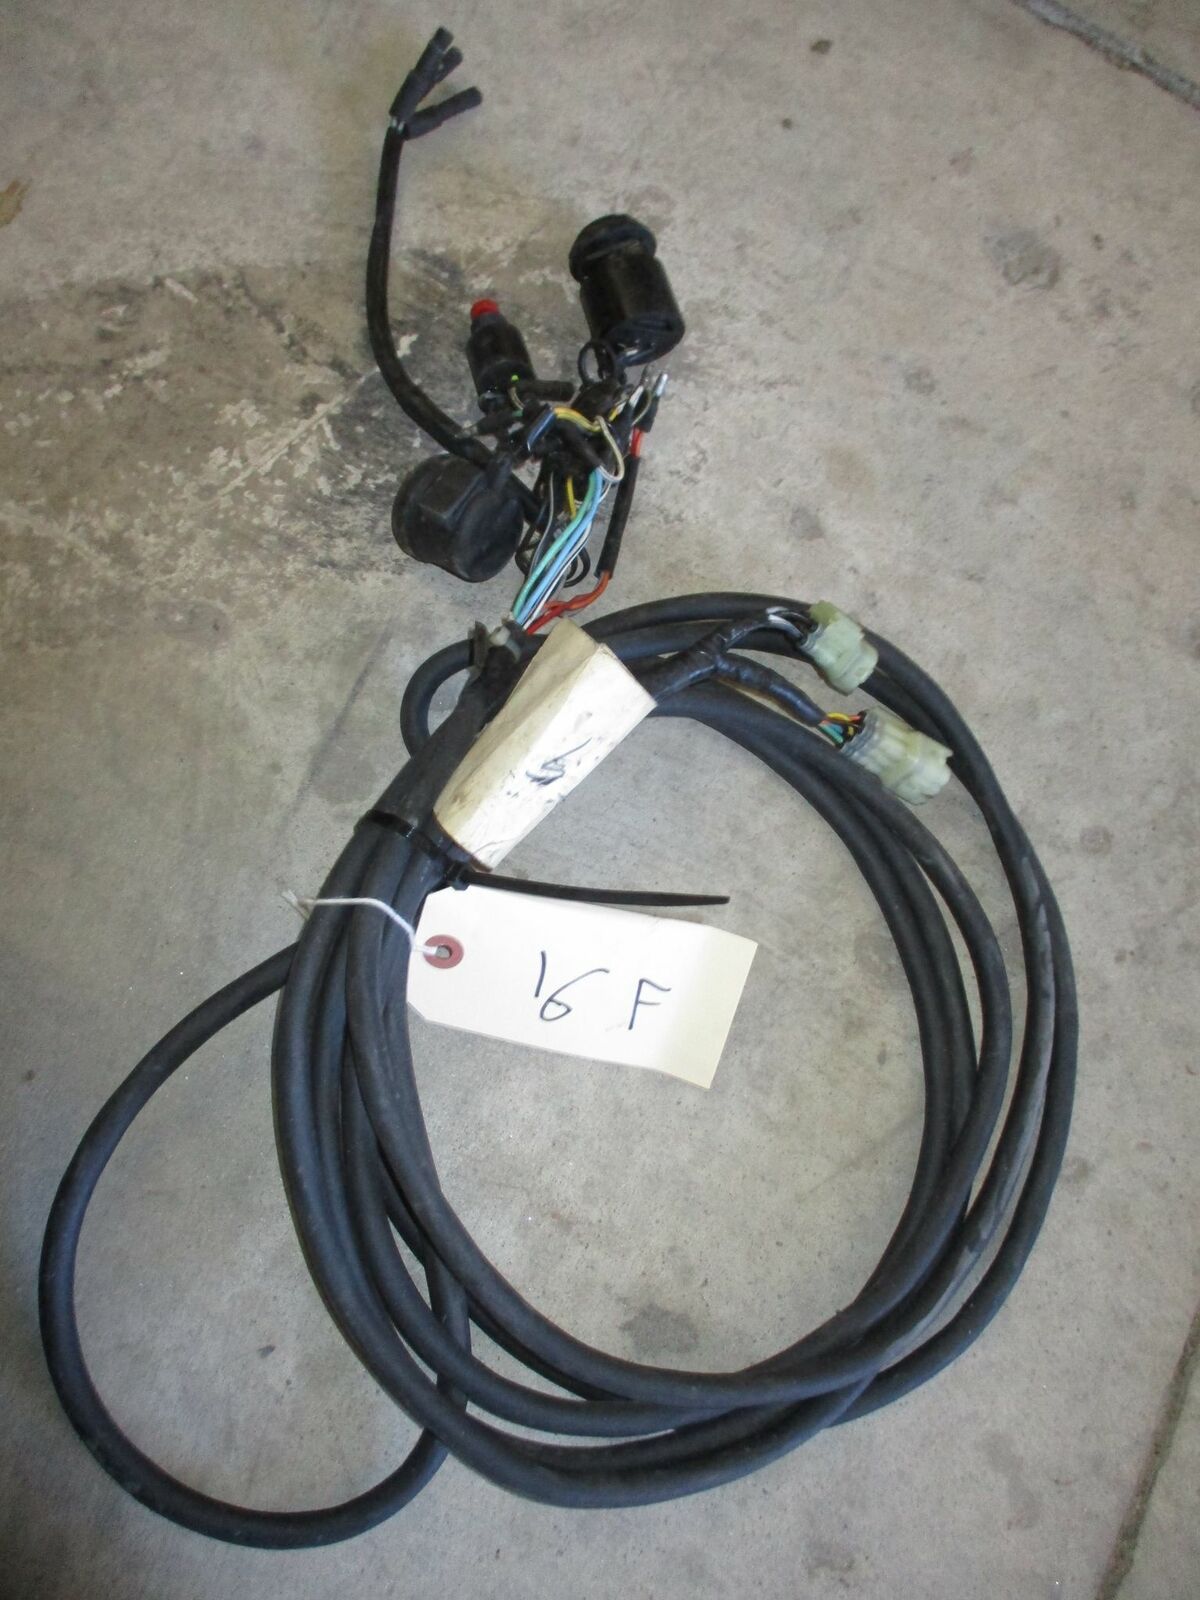 Honda outboard 16ft rigging/ wiring harness #3